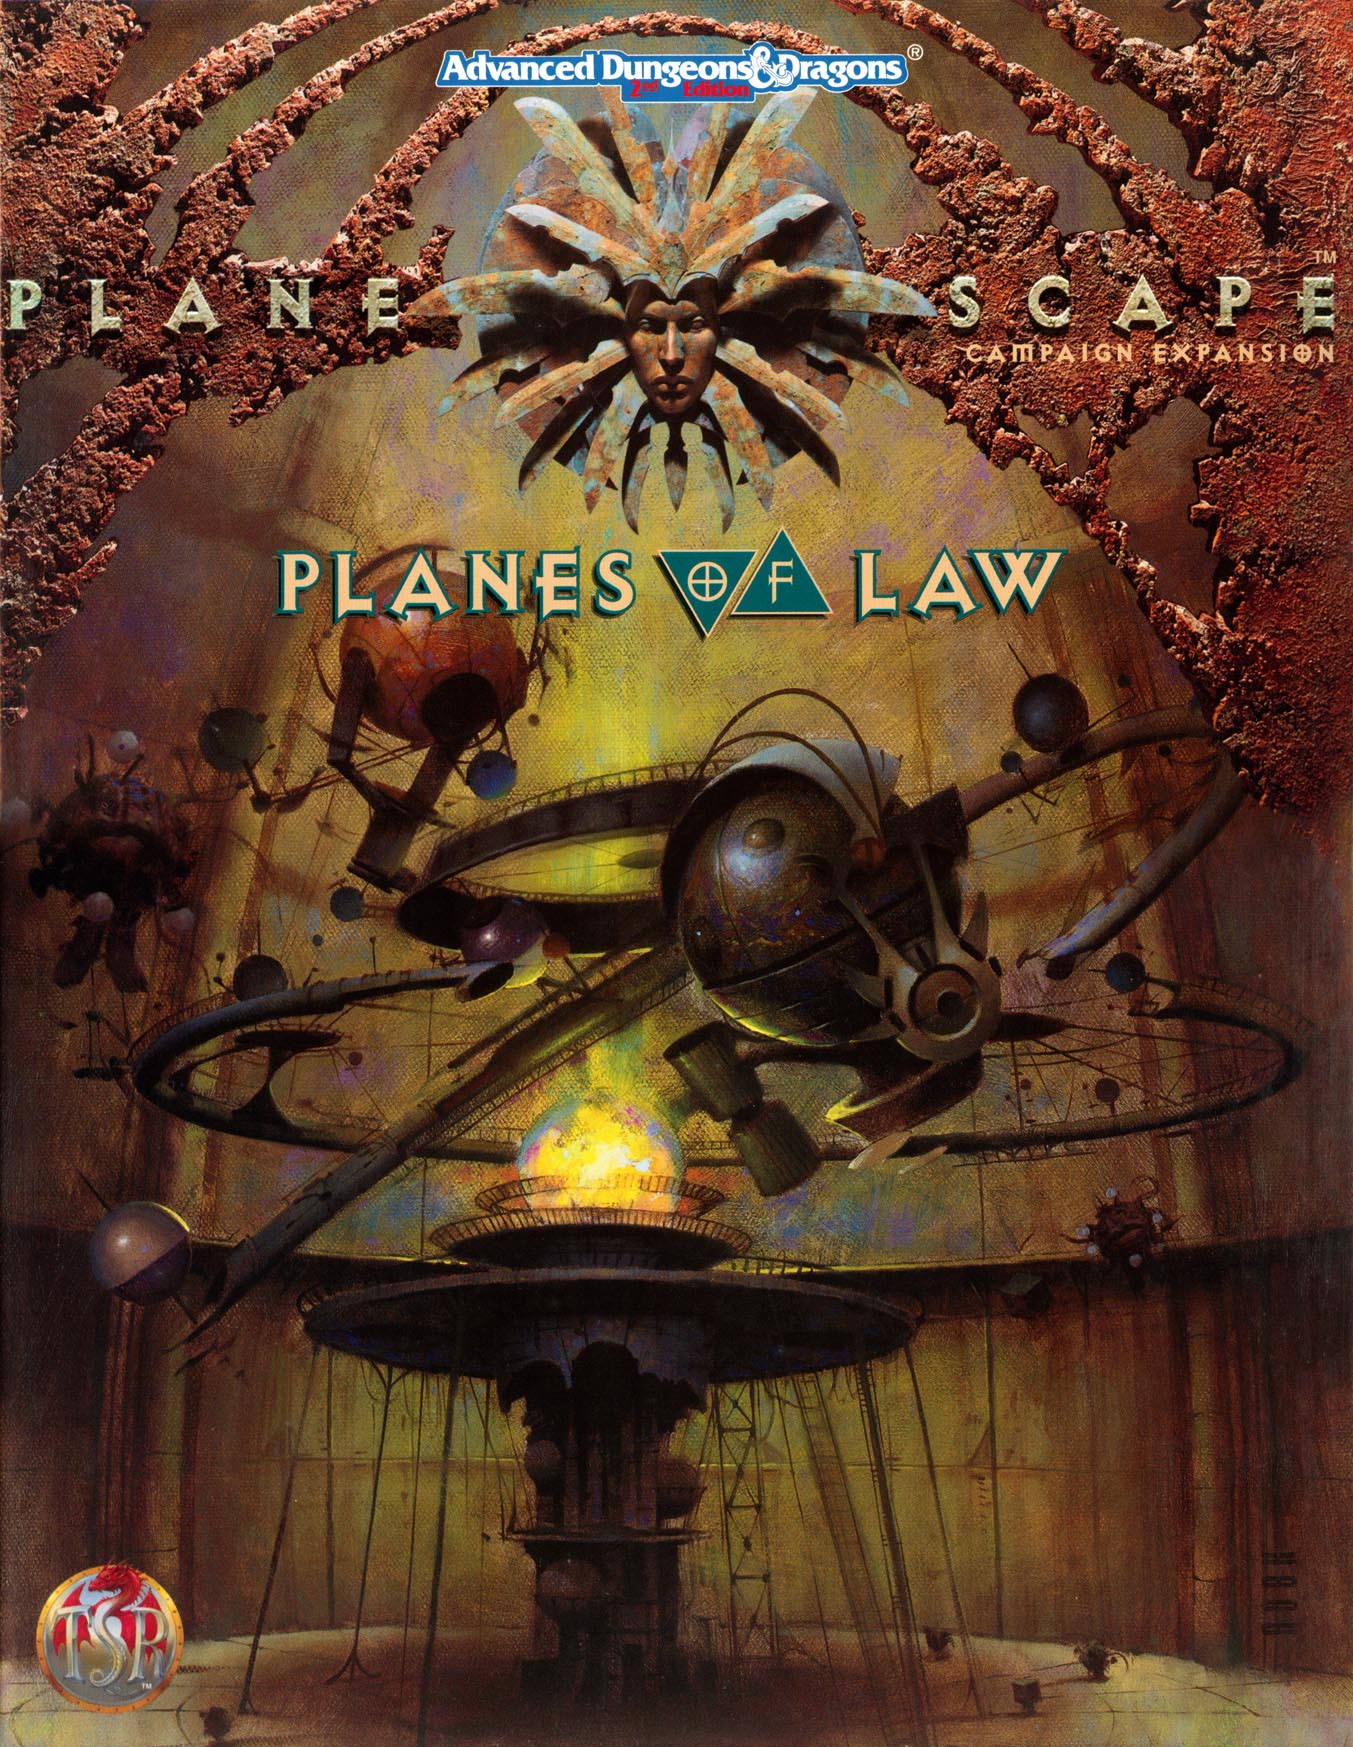 Planes of LawCover art